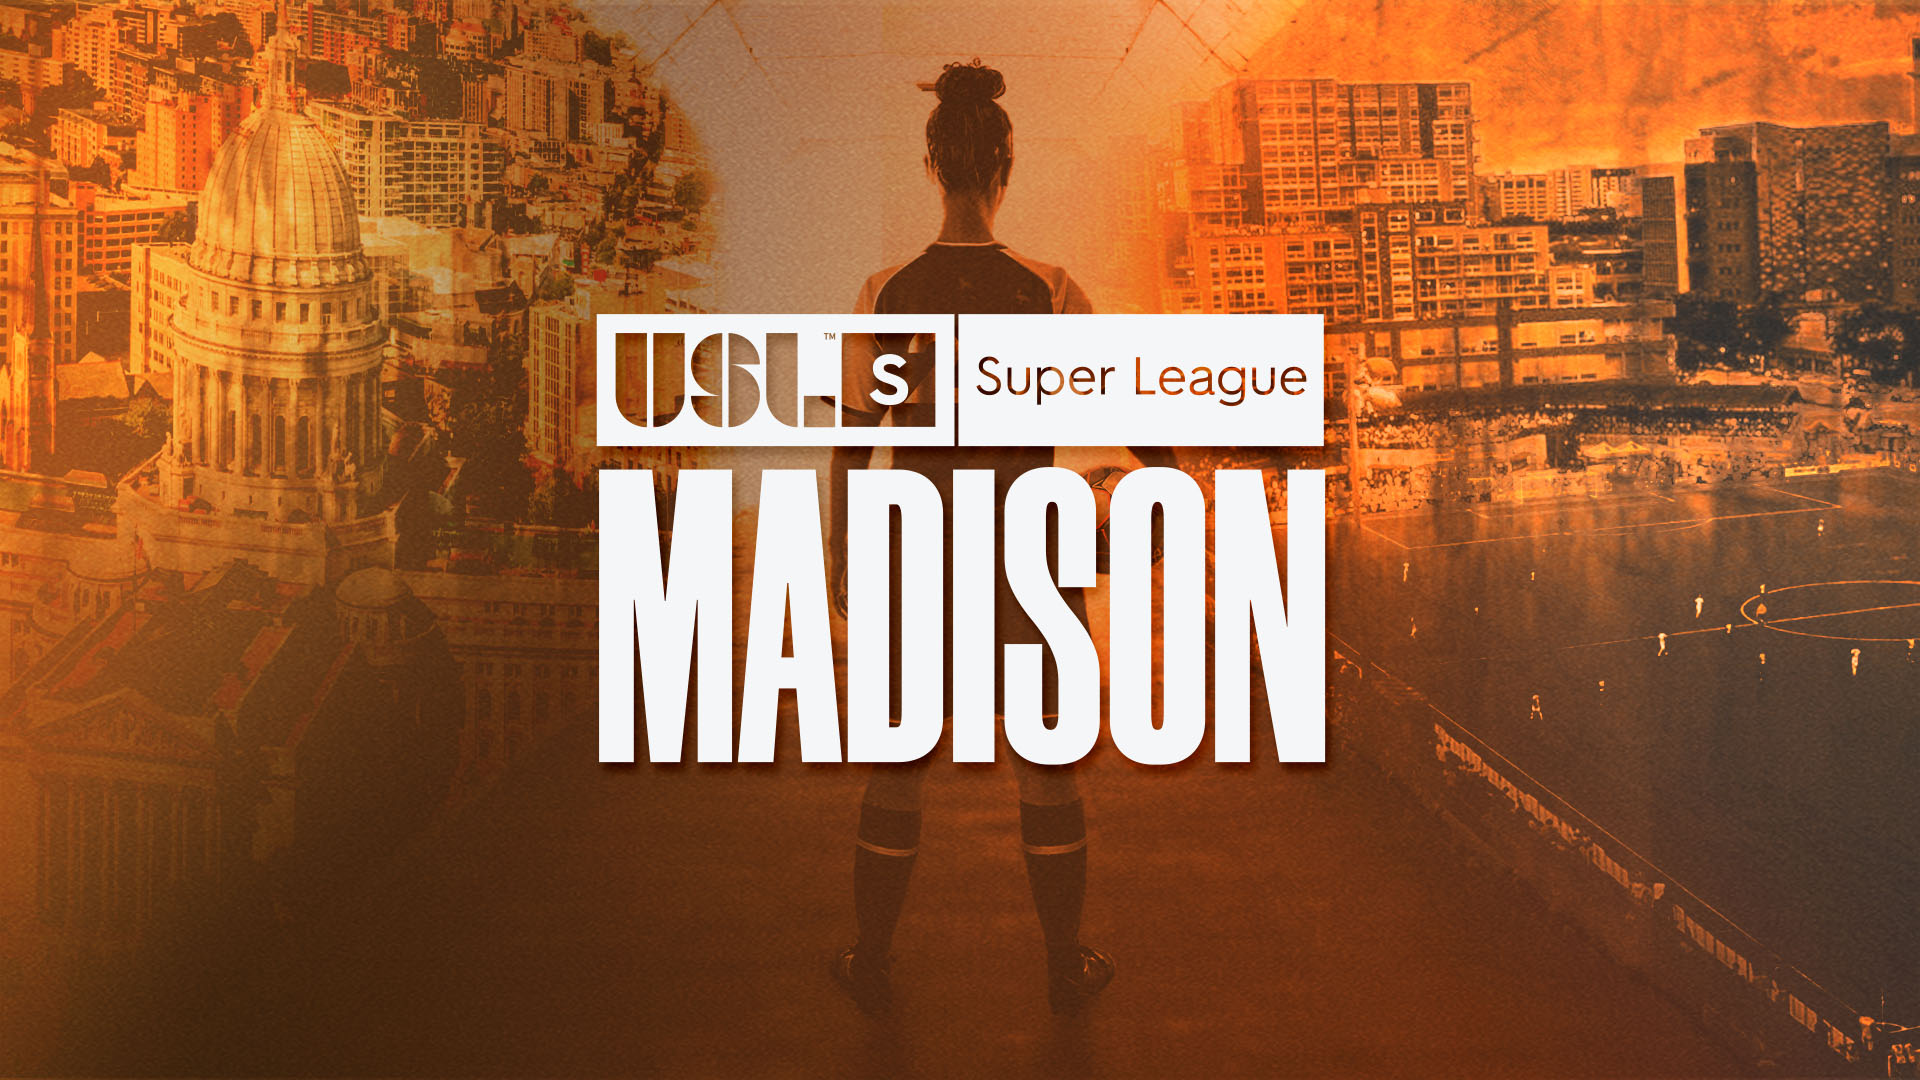 Top-tier professional women's soccer coming to Madison